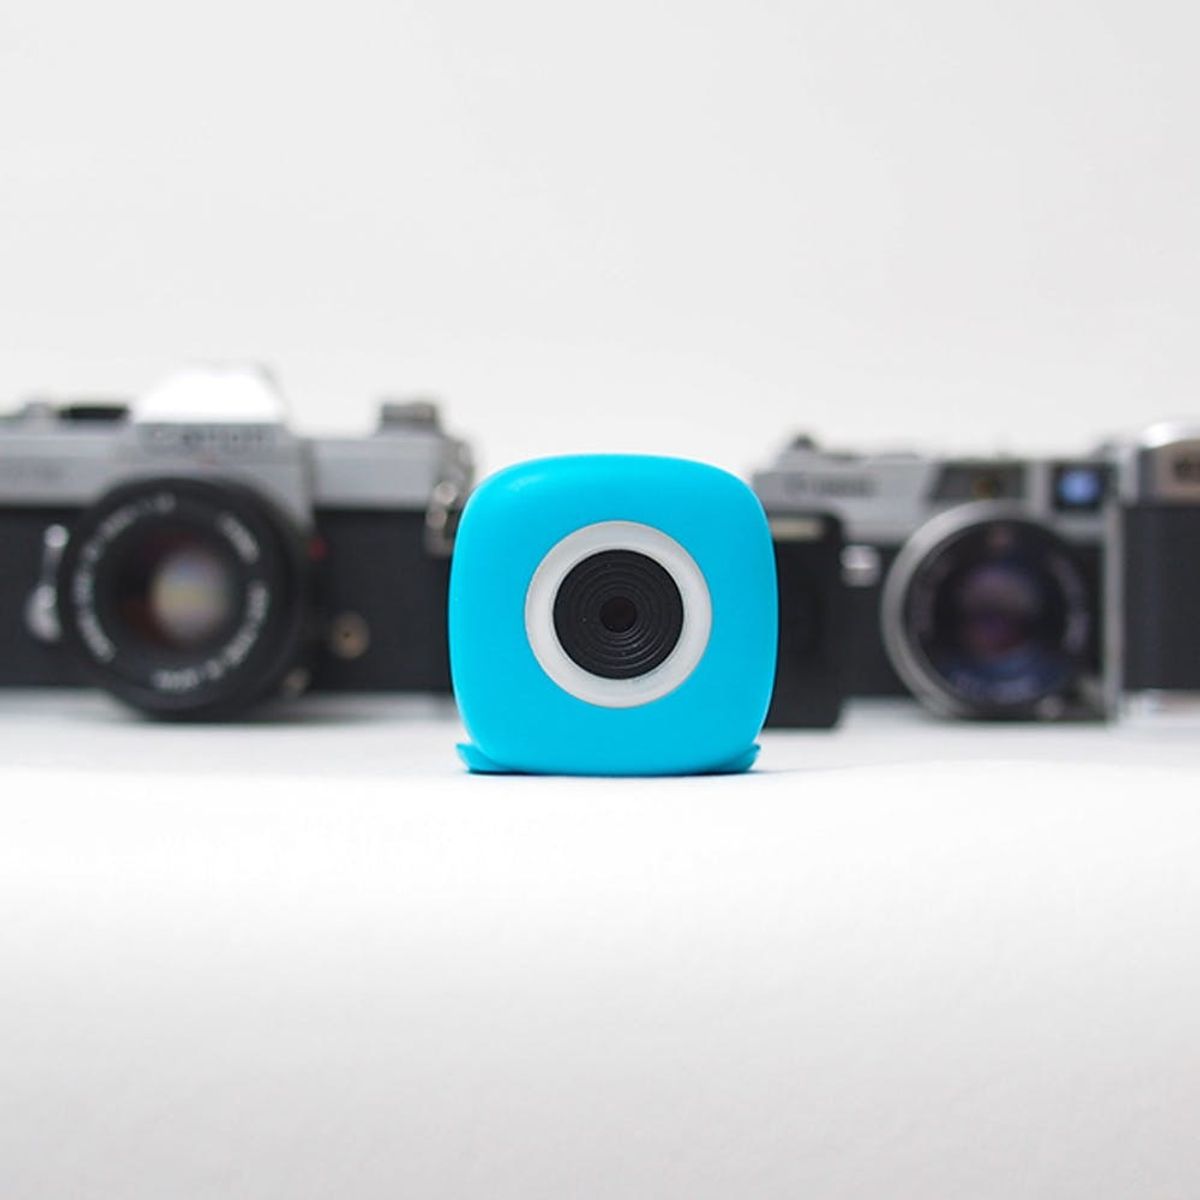 This Tiny Camera Is the Selfie Stick’s Biggest Nightmare